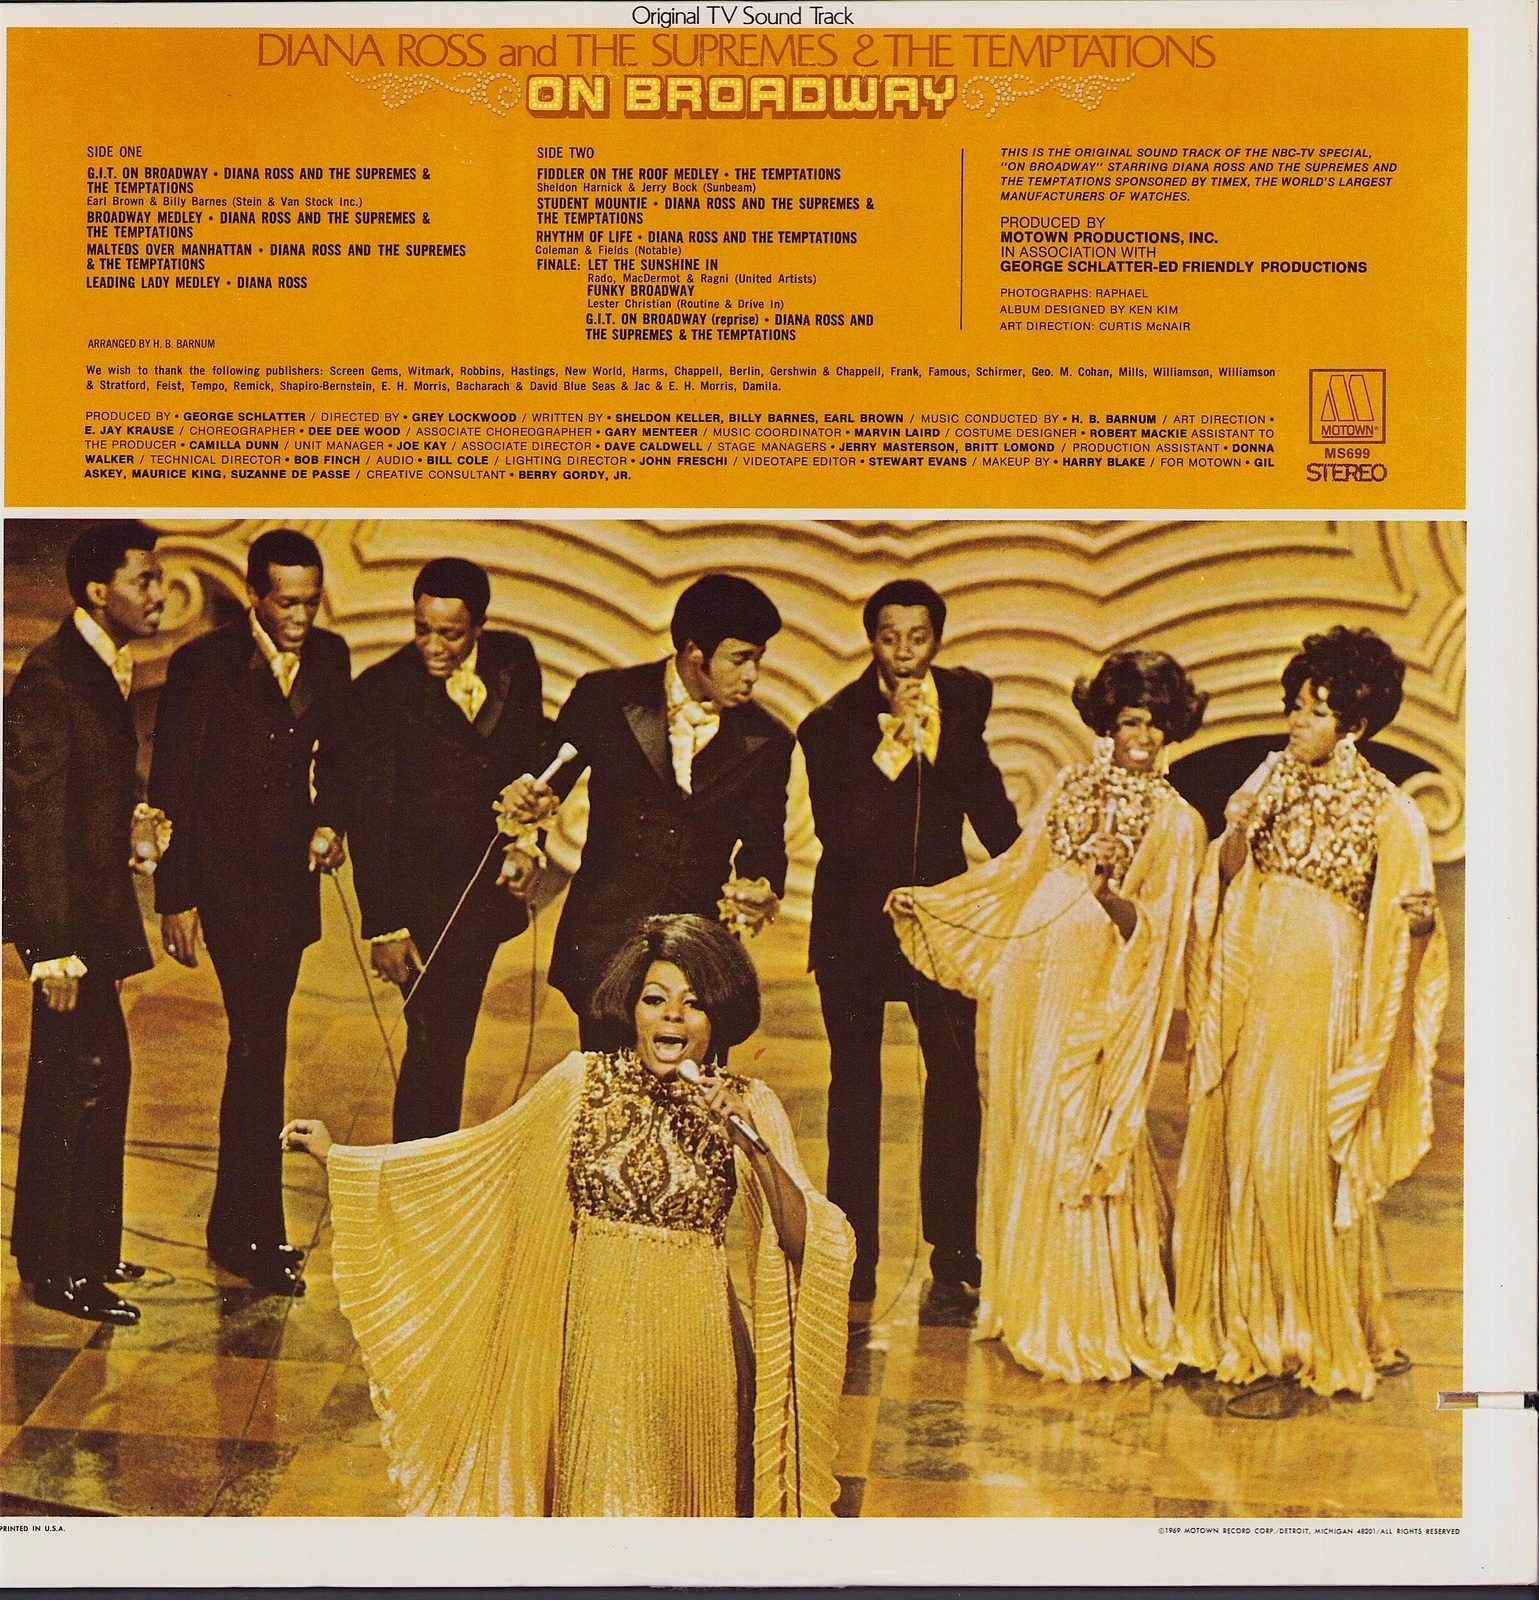 Diana Ross and The Supremes & The Temptations